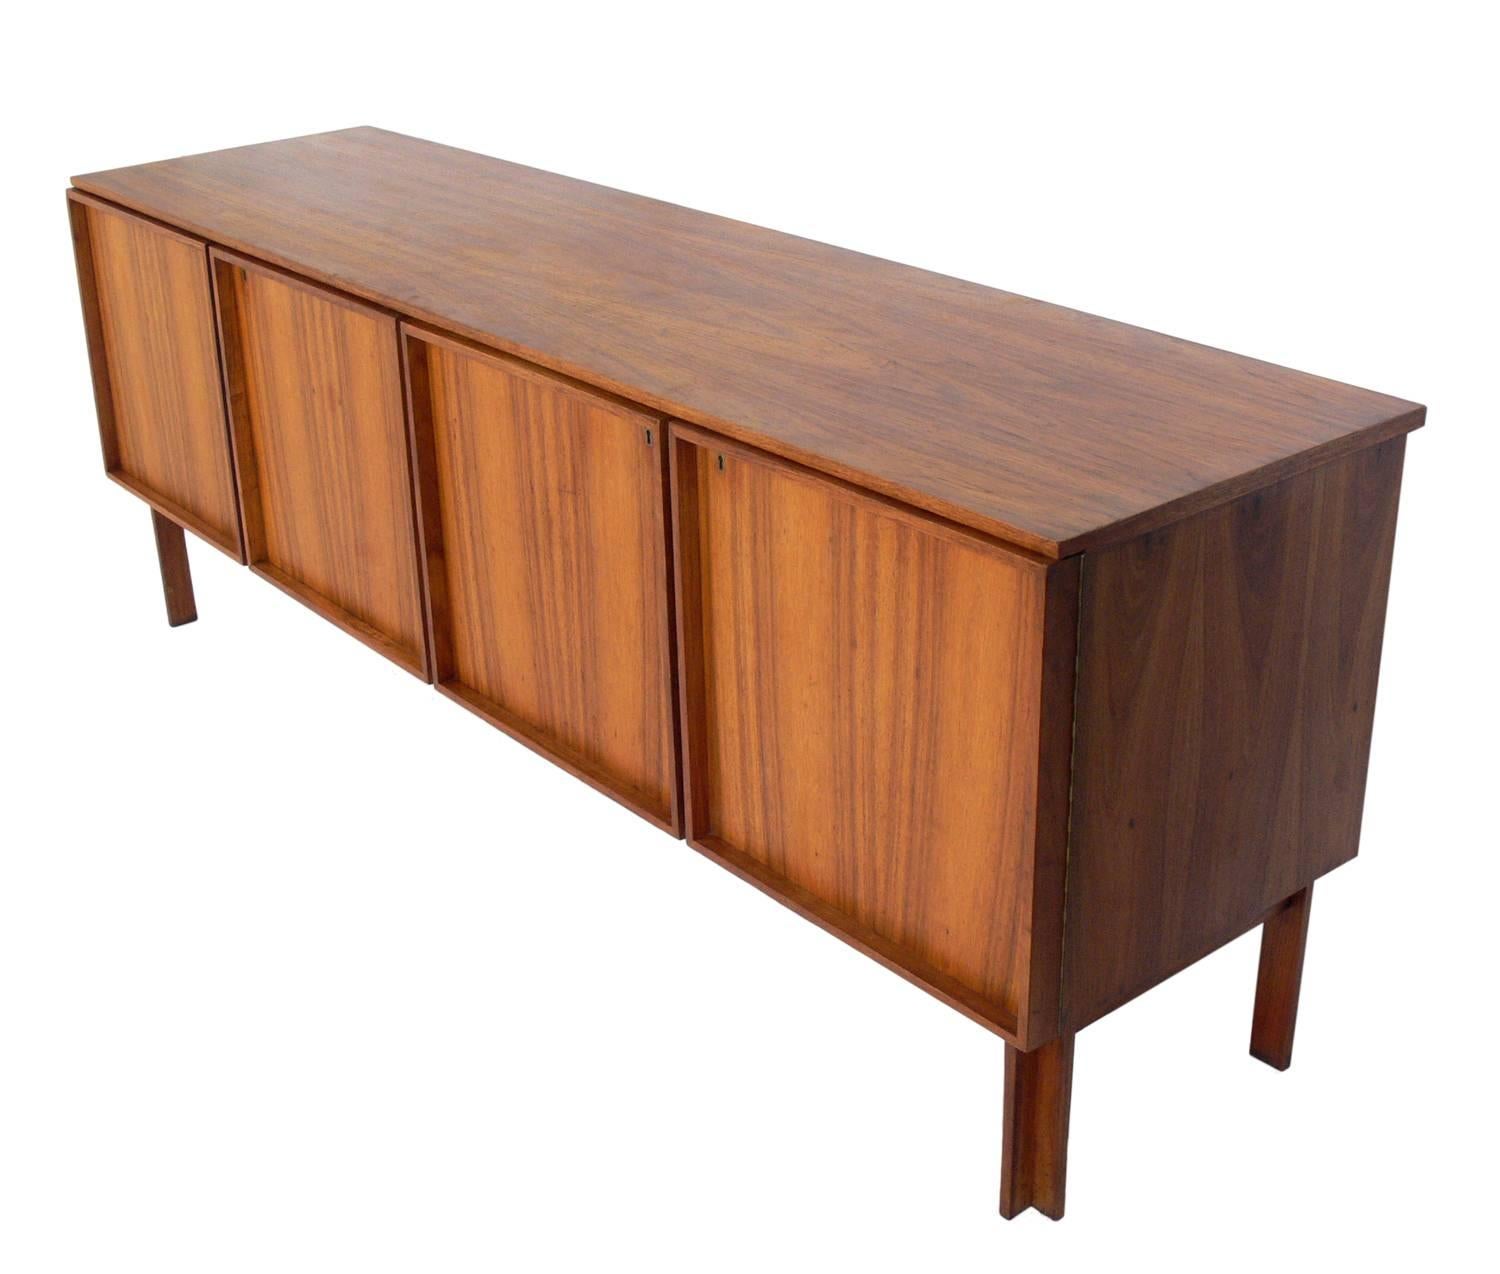 Clean lined midcentury credenza, designed by John Tabraham for Kallenbach, South African, circa 1960s. Retains wonderful original patina. This piece is a versatile size and can be used as a credenza, sideboard, media cabinet, or bar. It offers a